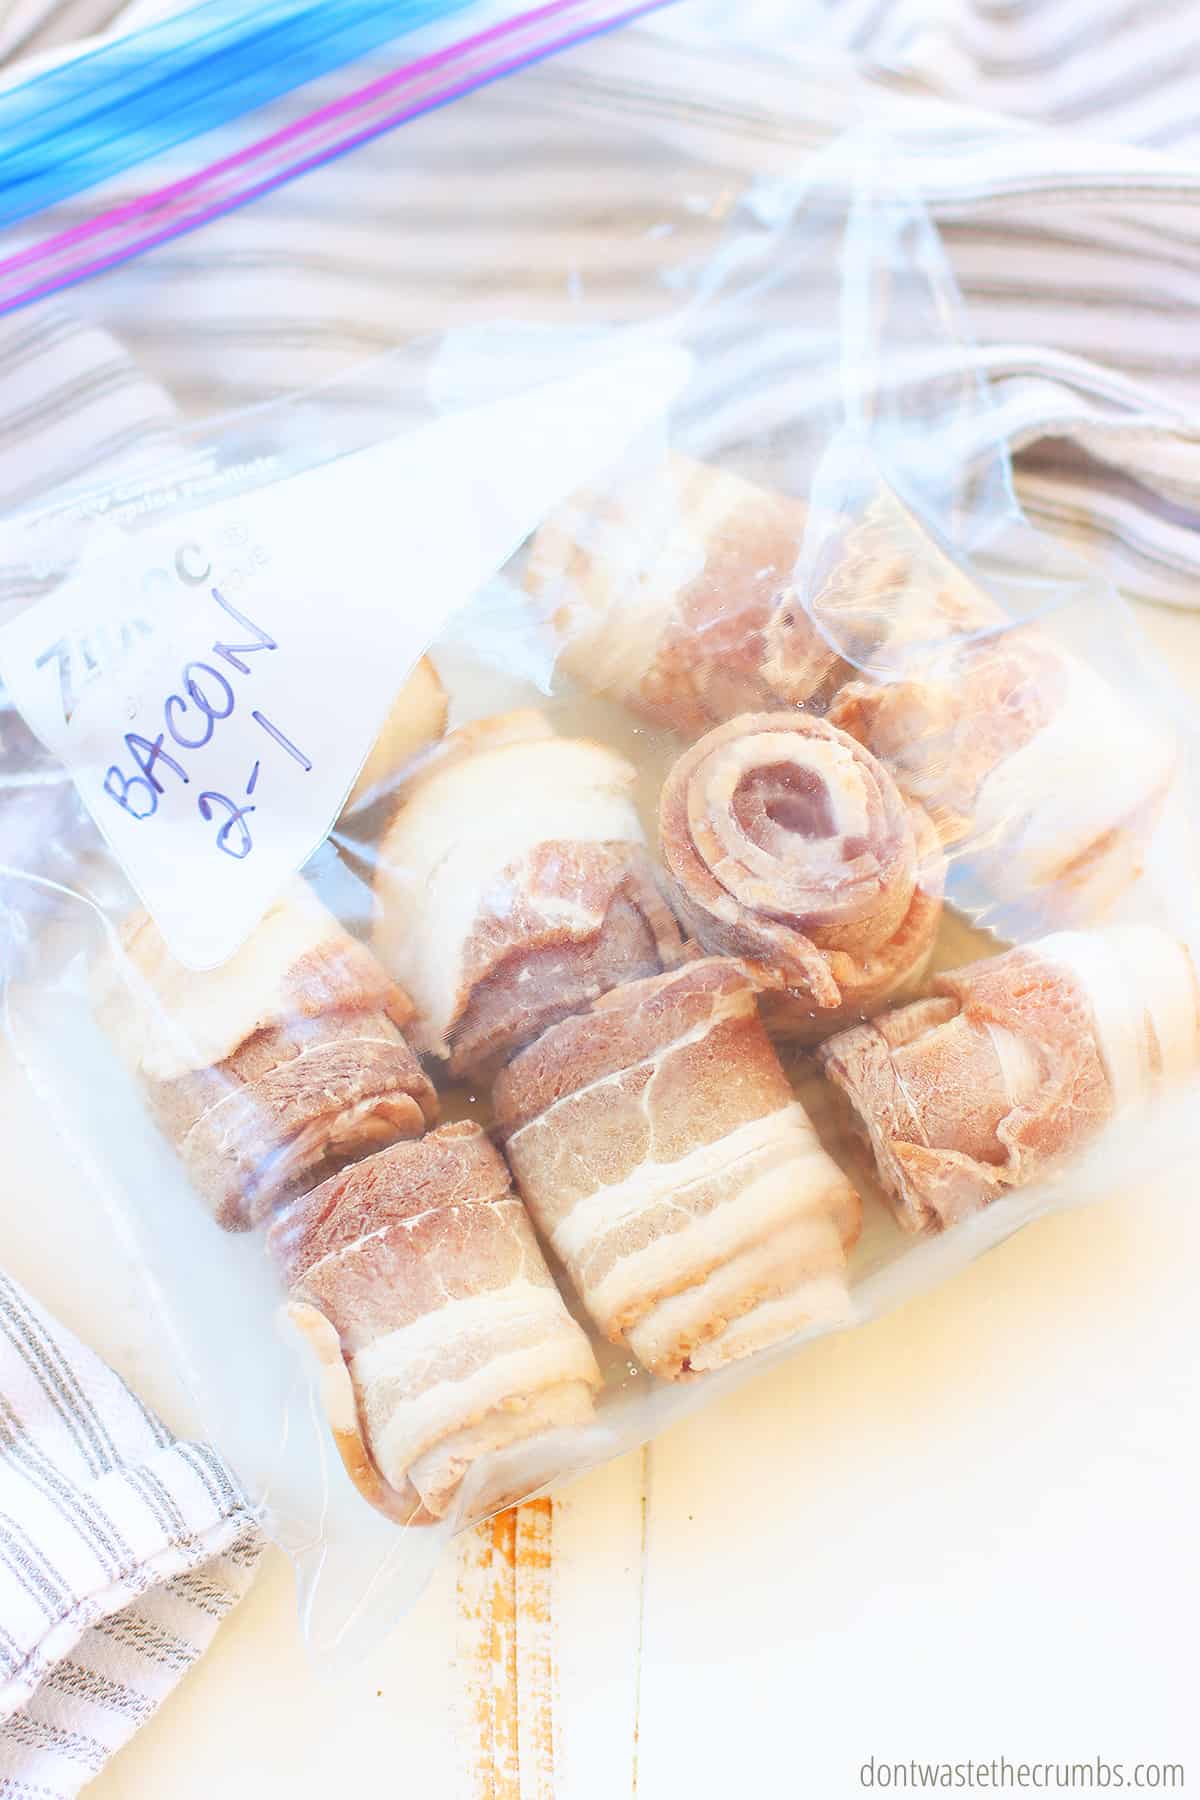 Marked freezer bag full of rolled and frozen bacon slices. 